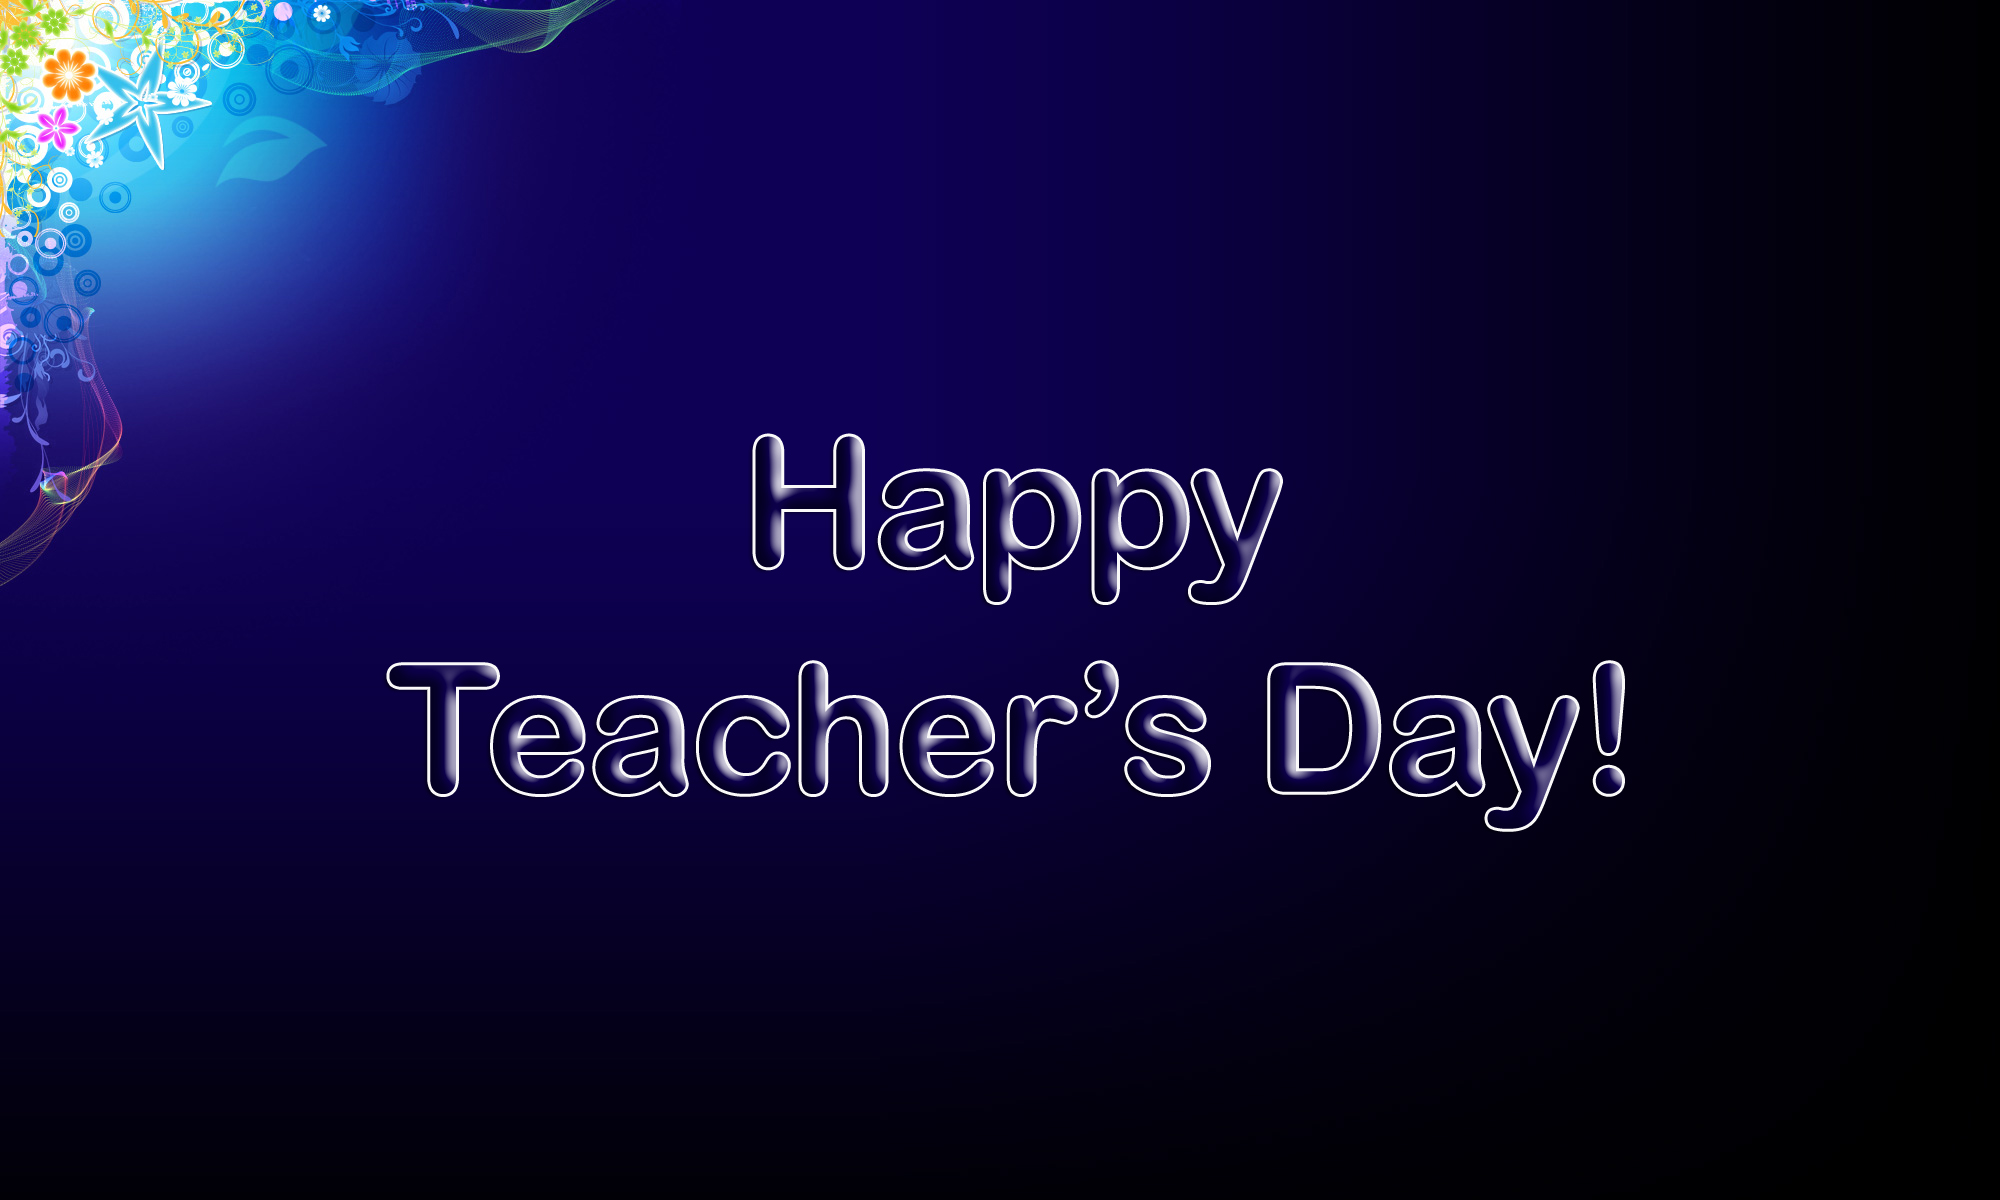 Teachers Day HD Images, Wallpapers - Download